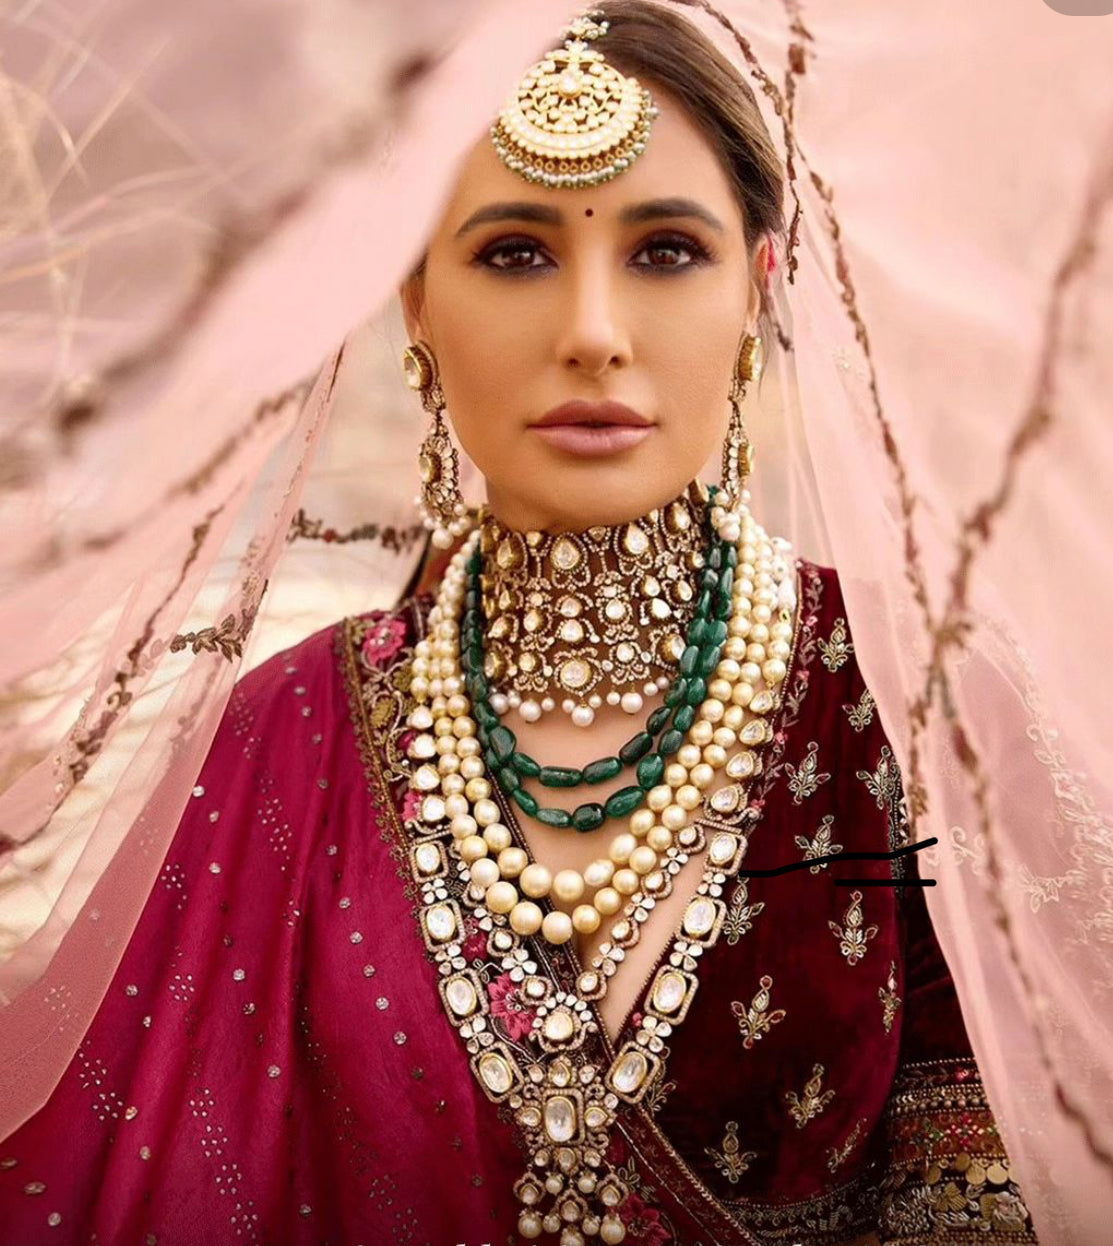 BRIDAL AND WEDDING INDIAN JEWELRY